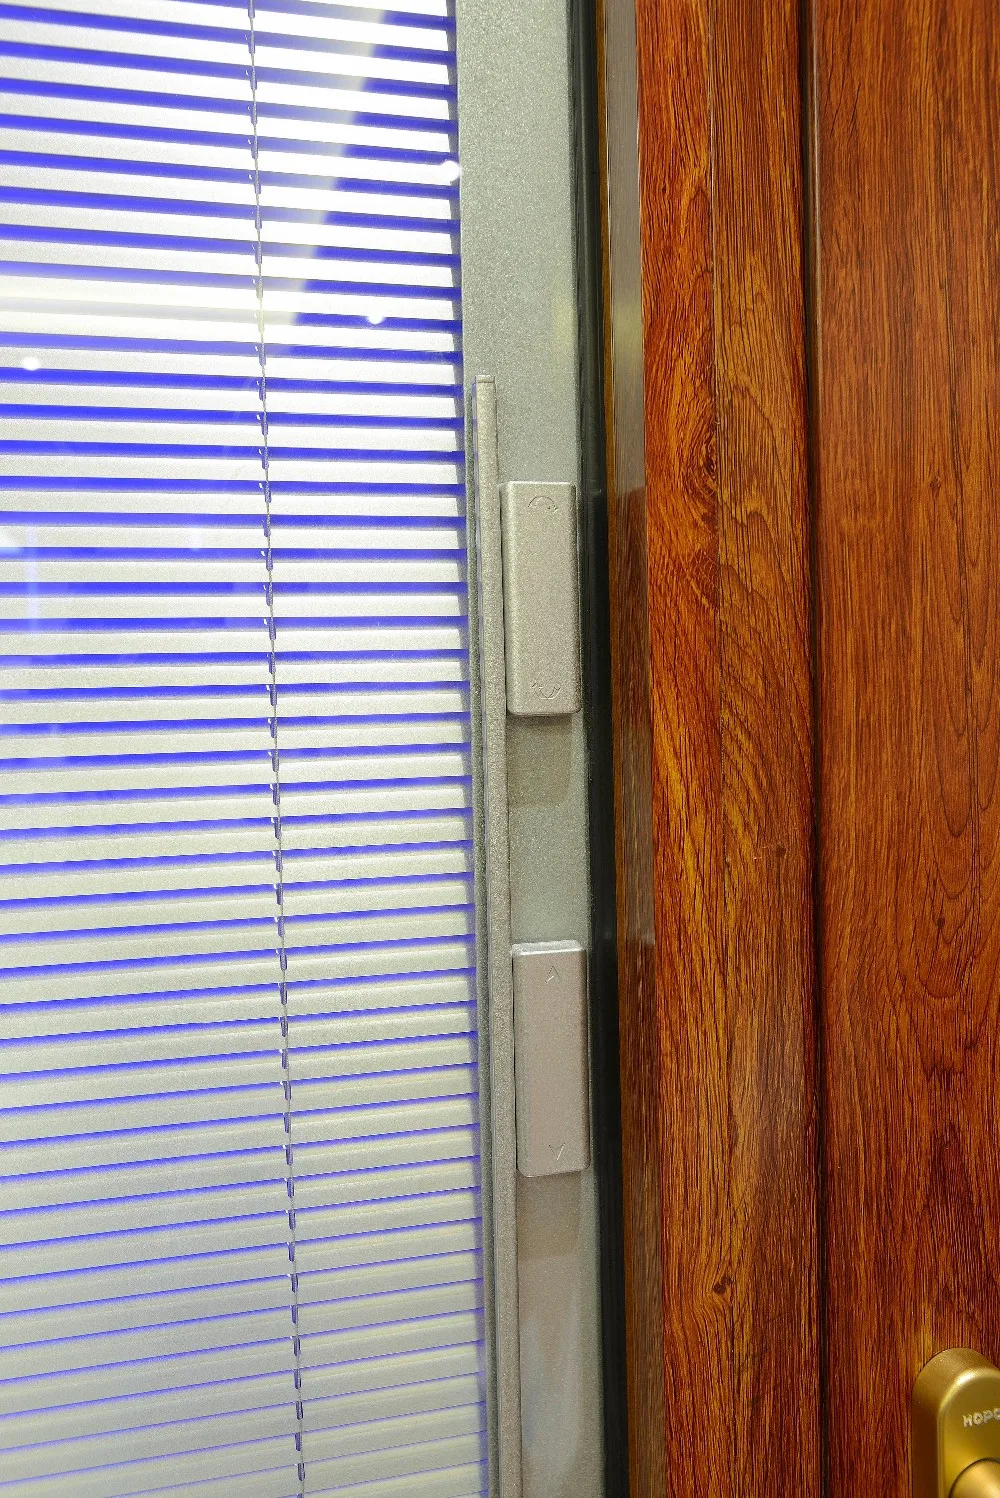 What are some brands that offer high-quality indoor wood shutters?